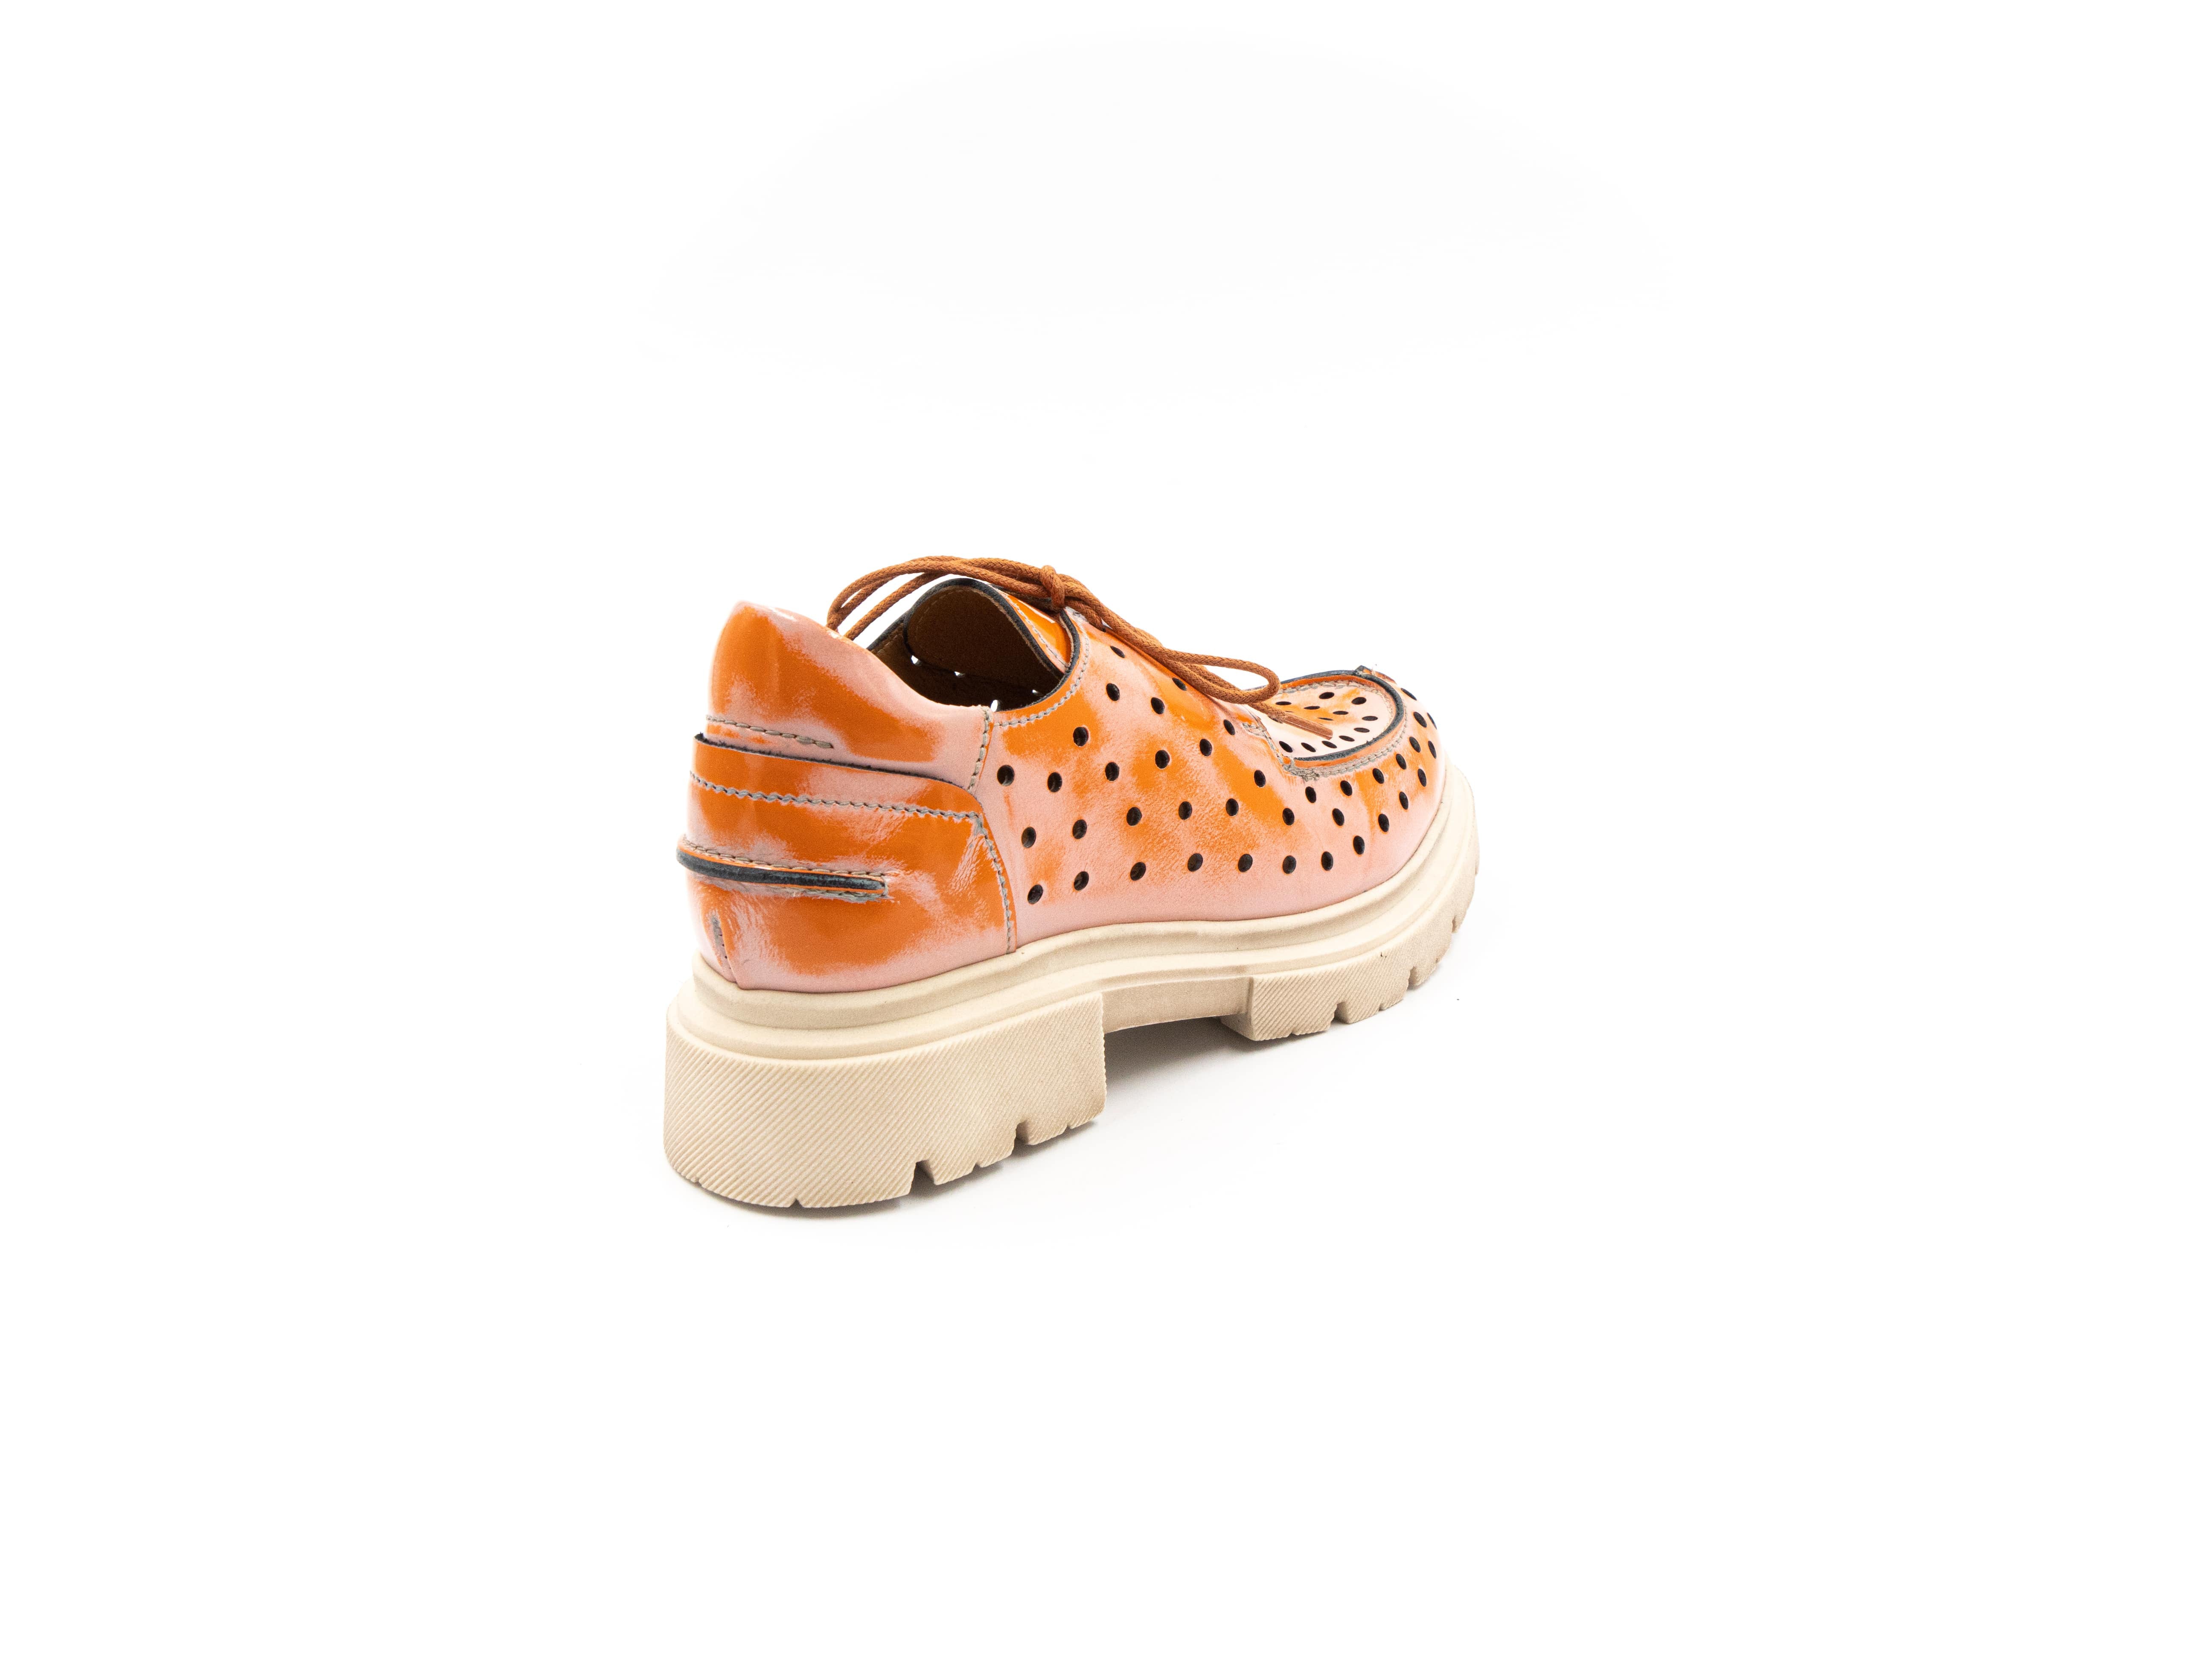 Perforated summer shoes.